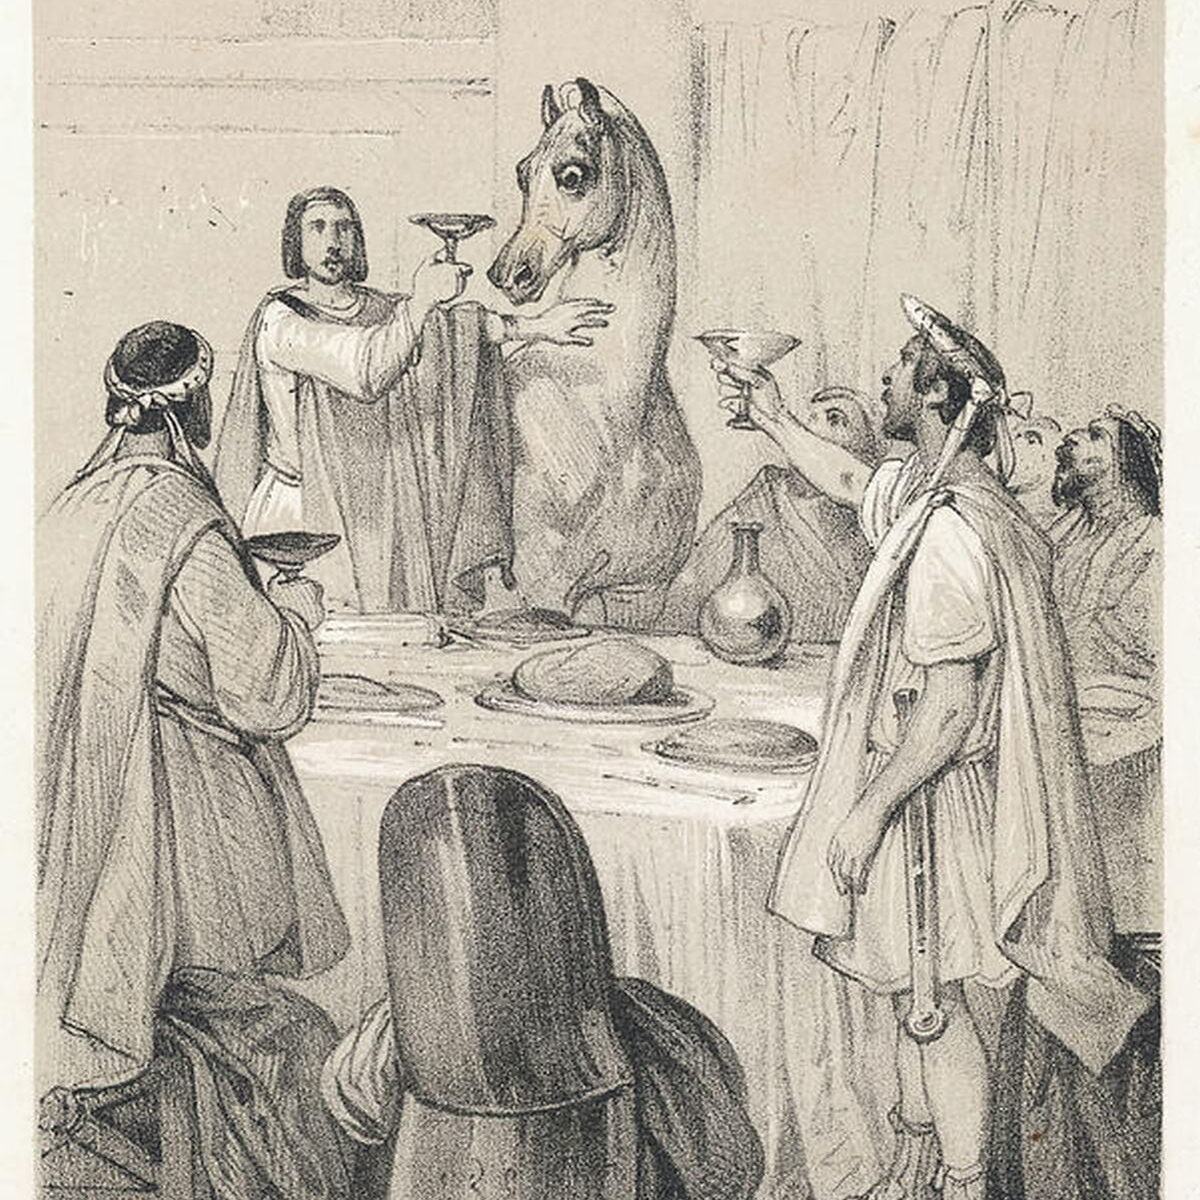 A drawing showing Incitatus at the feast